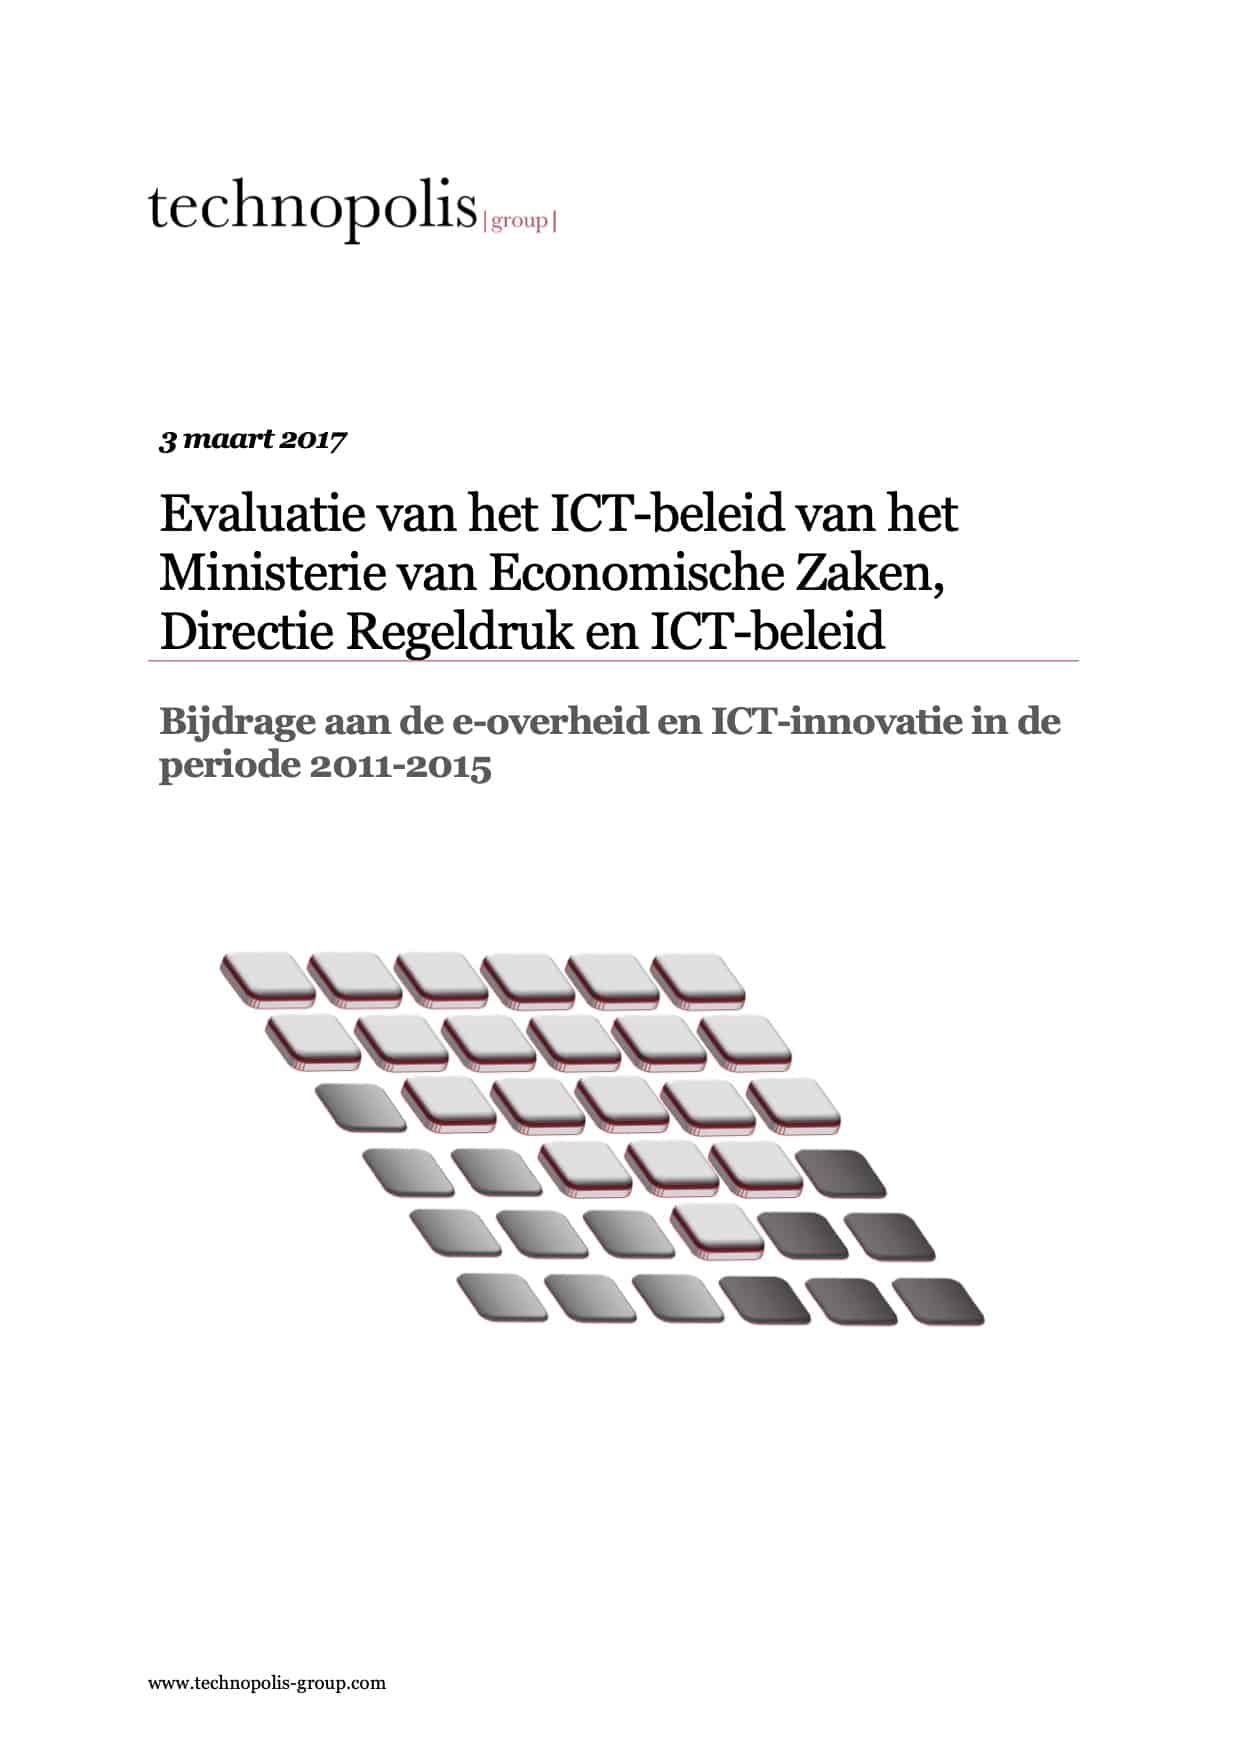 Evaluation of Dutch ICT policy (2011-2015)